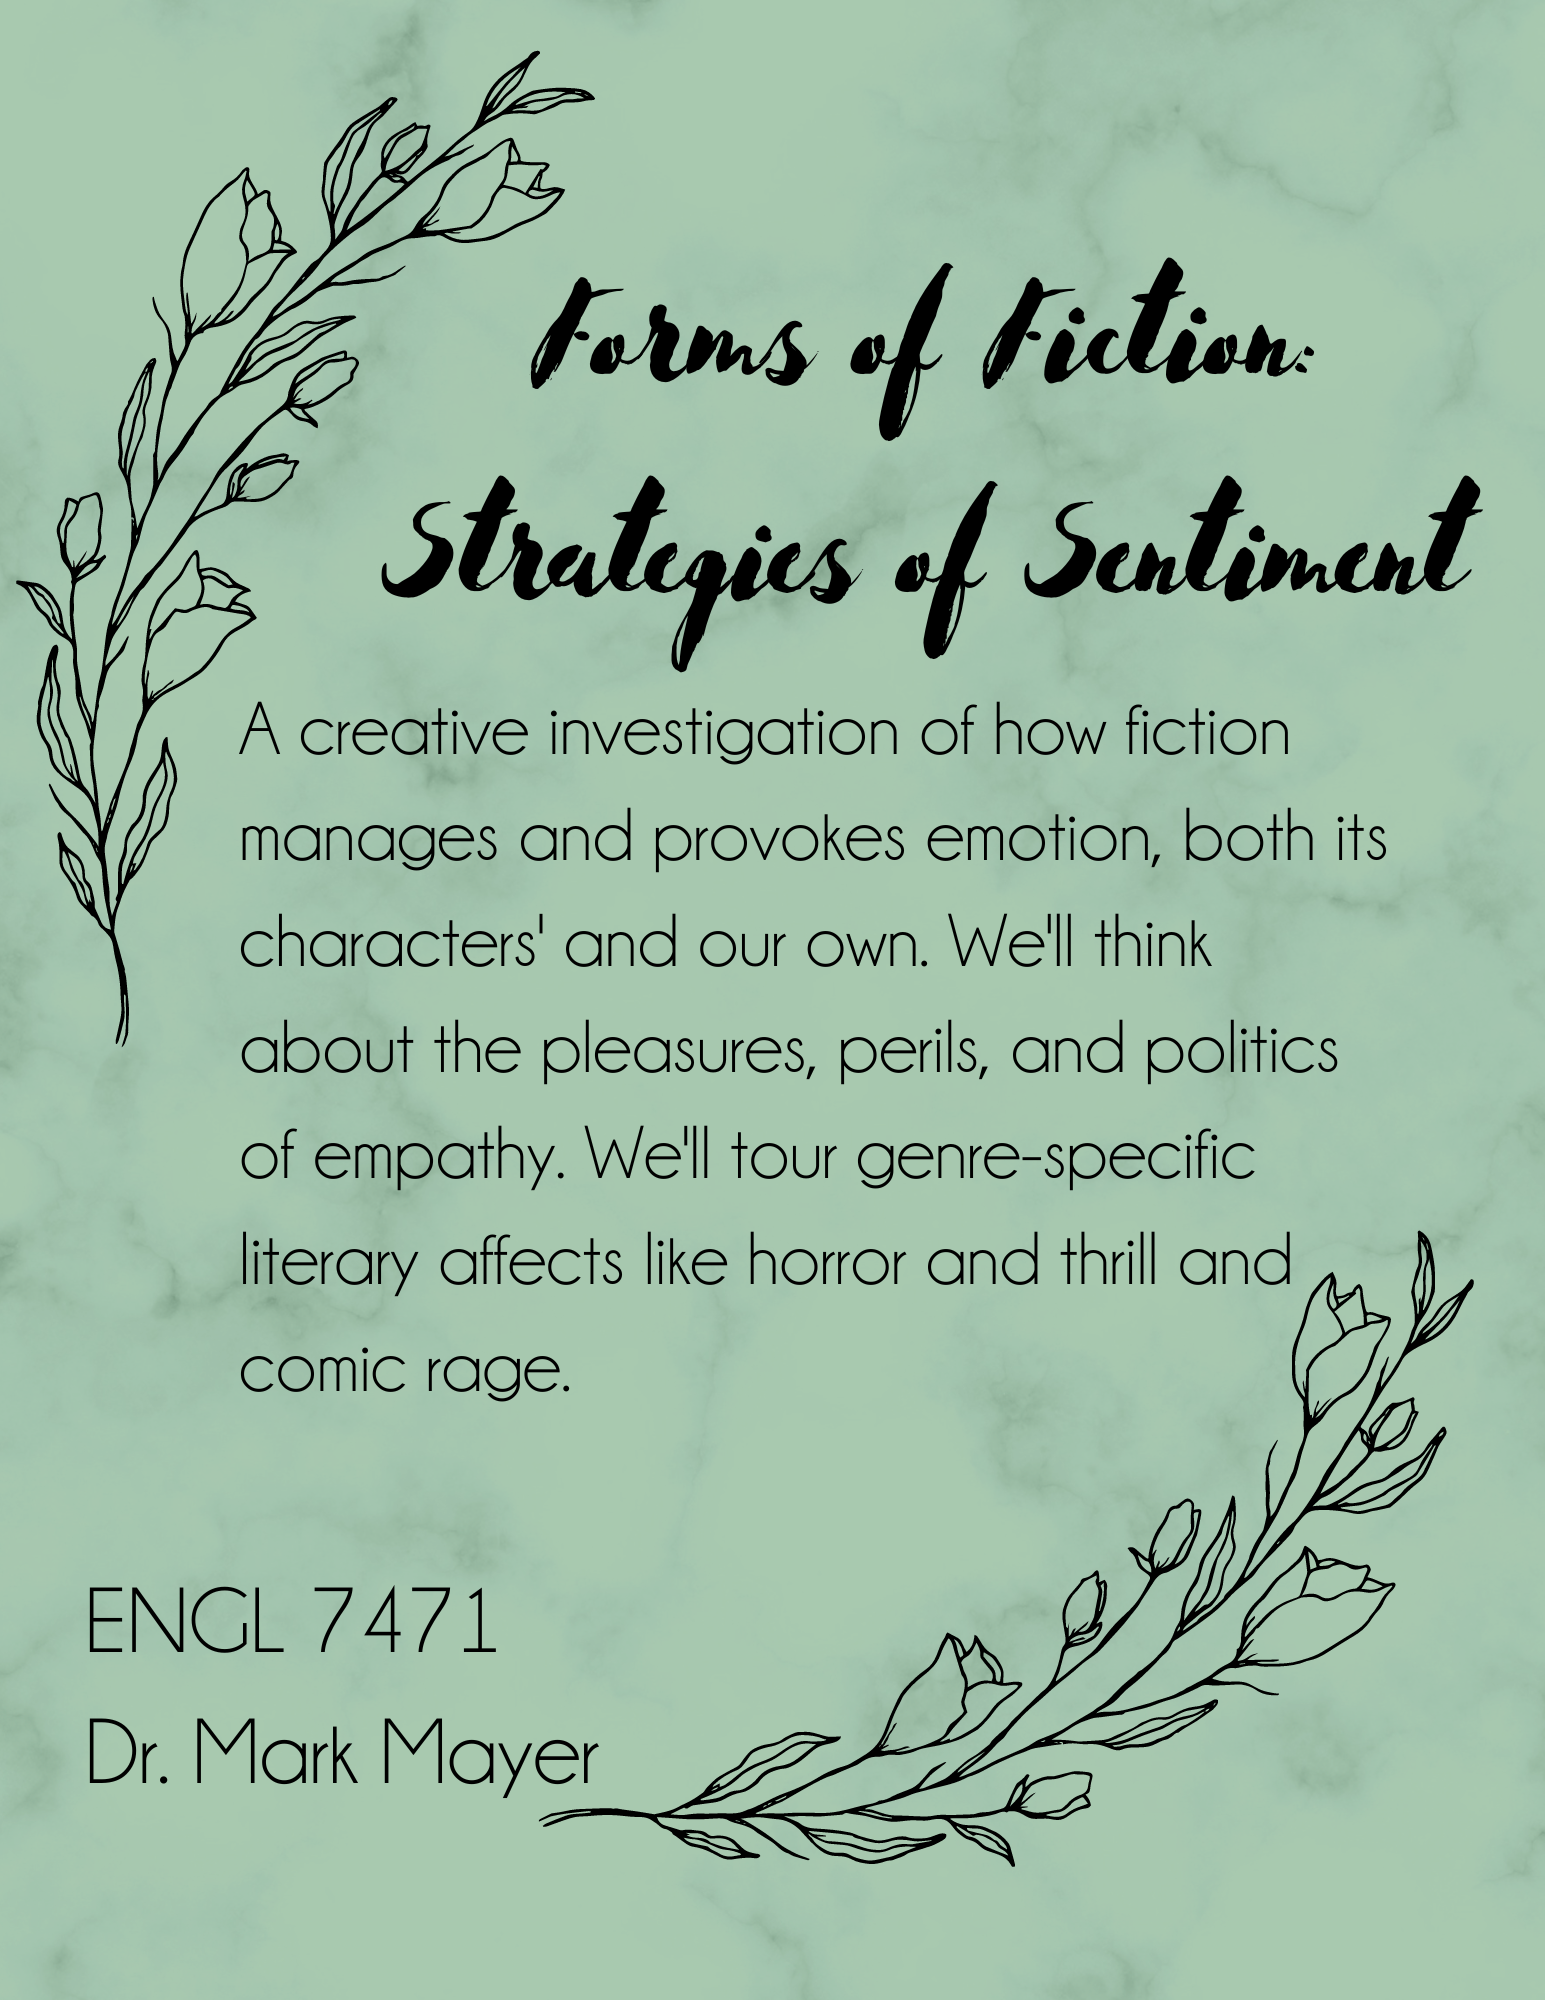 Forms of Fiction: Strategies of Sentiment